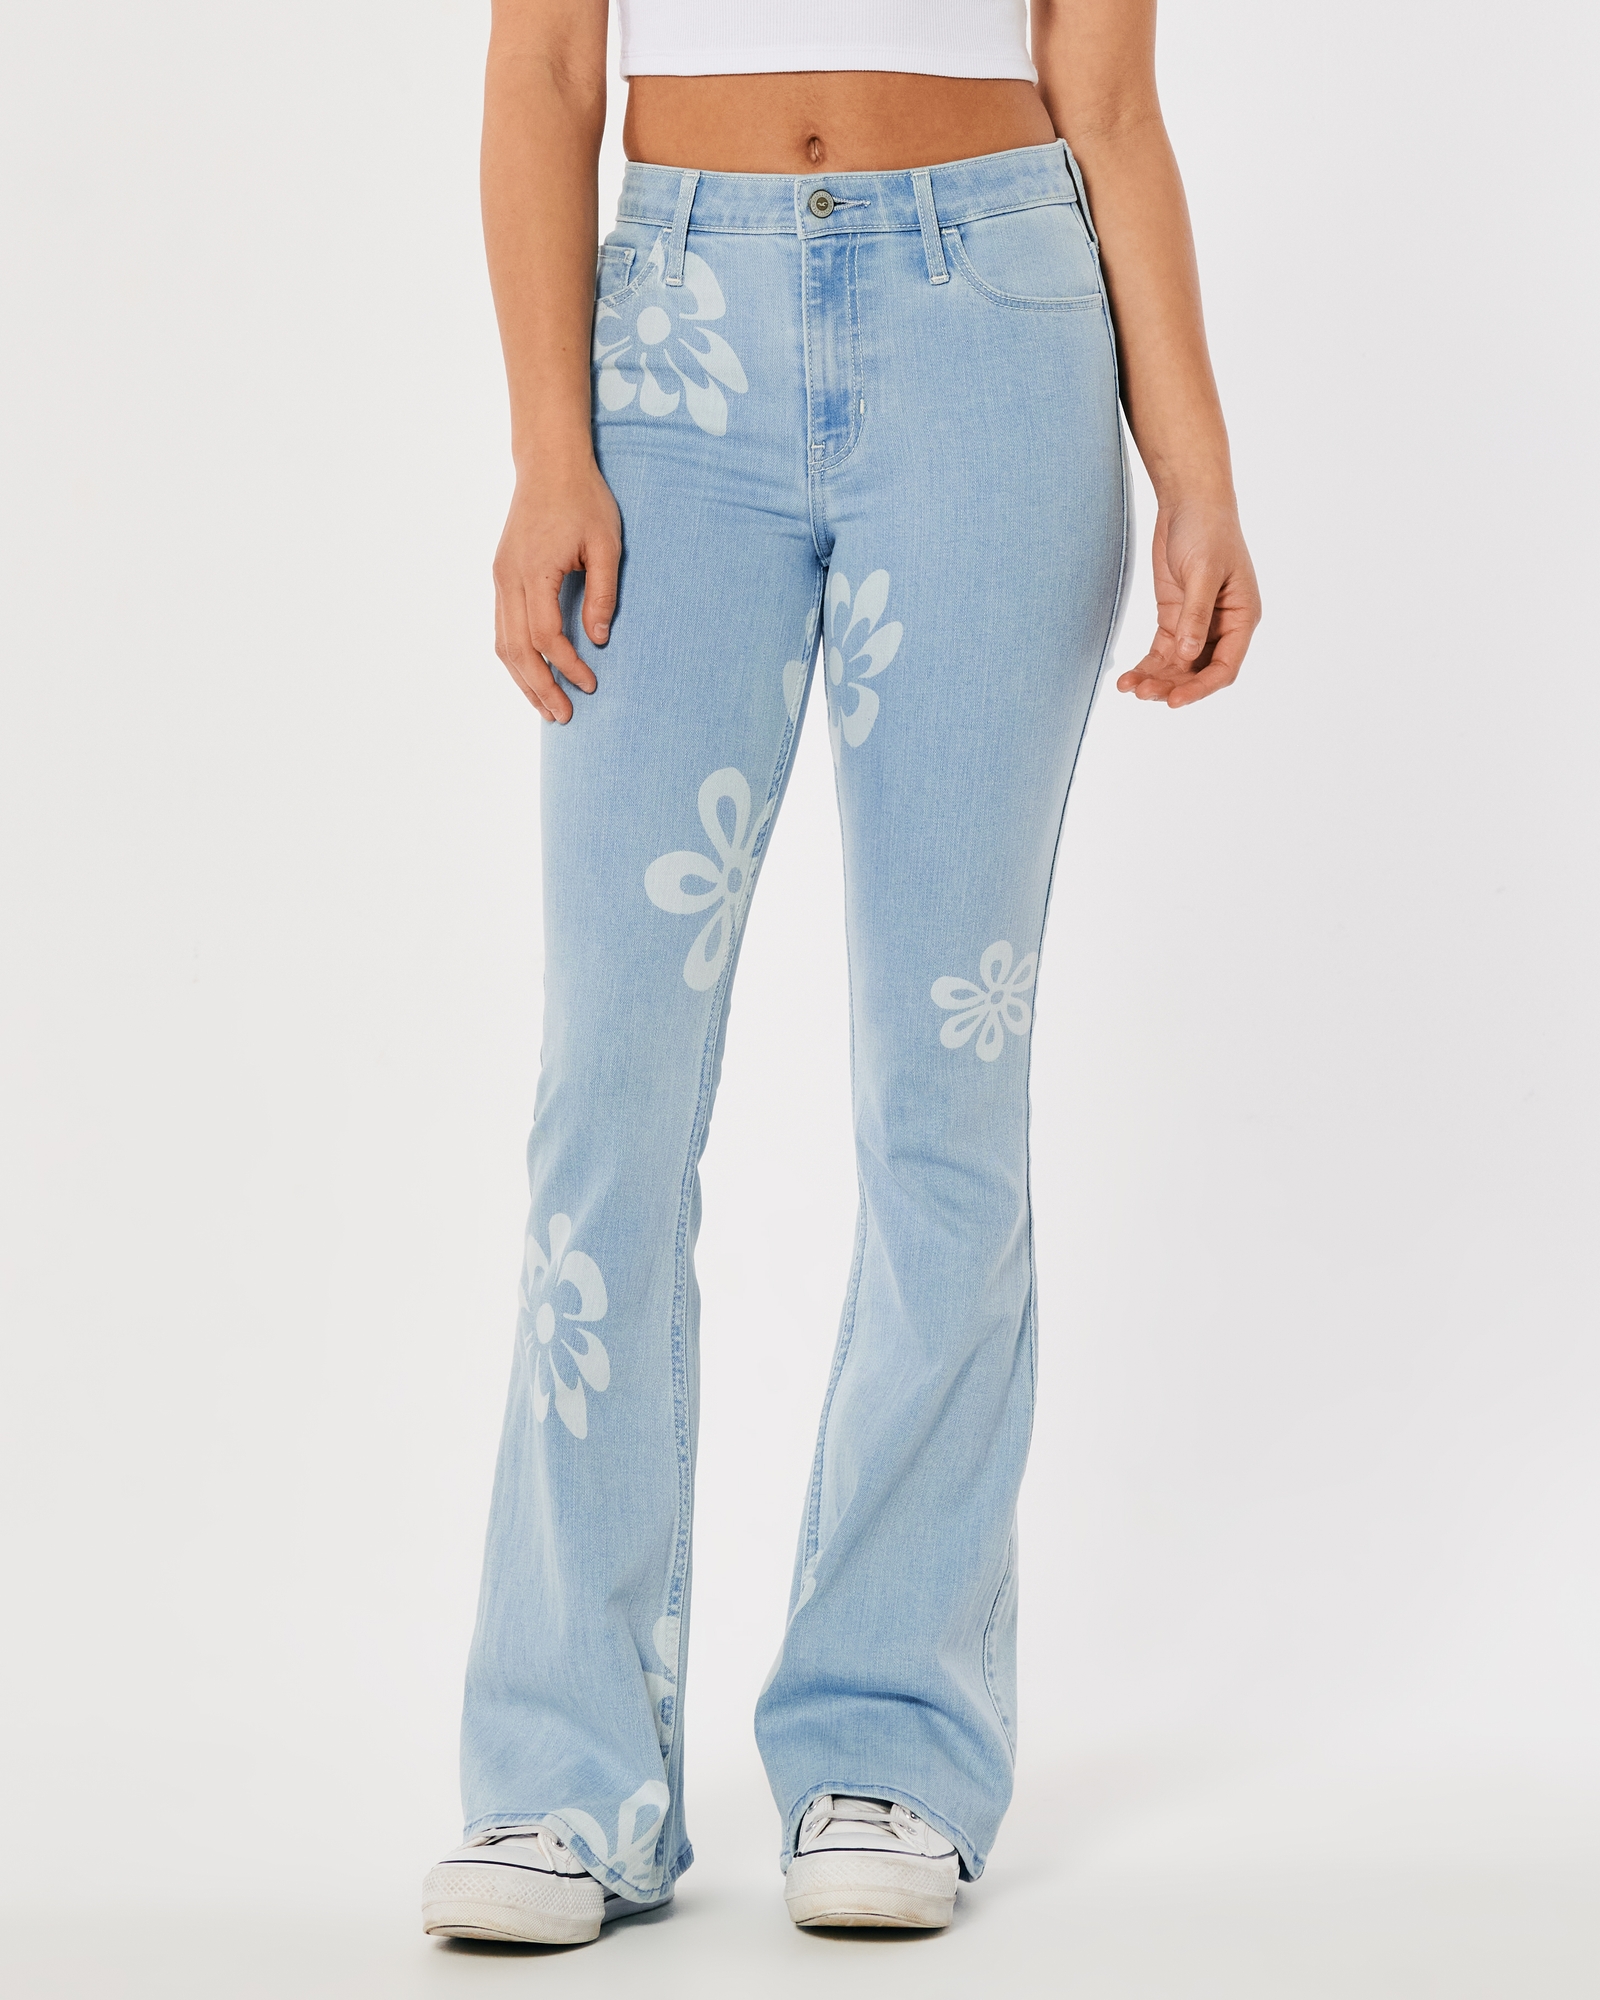 Hollister Daisy High Rise Flare Jeans Size 7 Retro Stretch Light